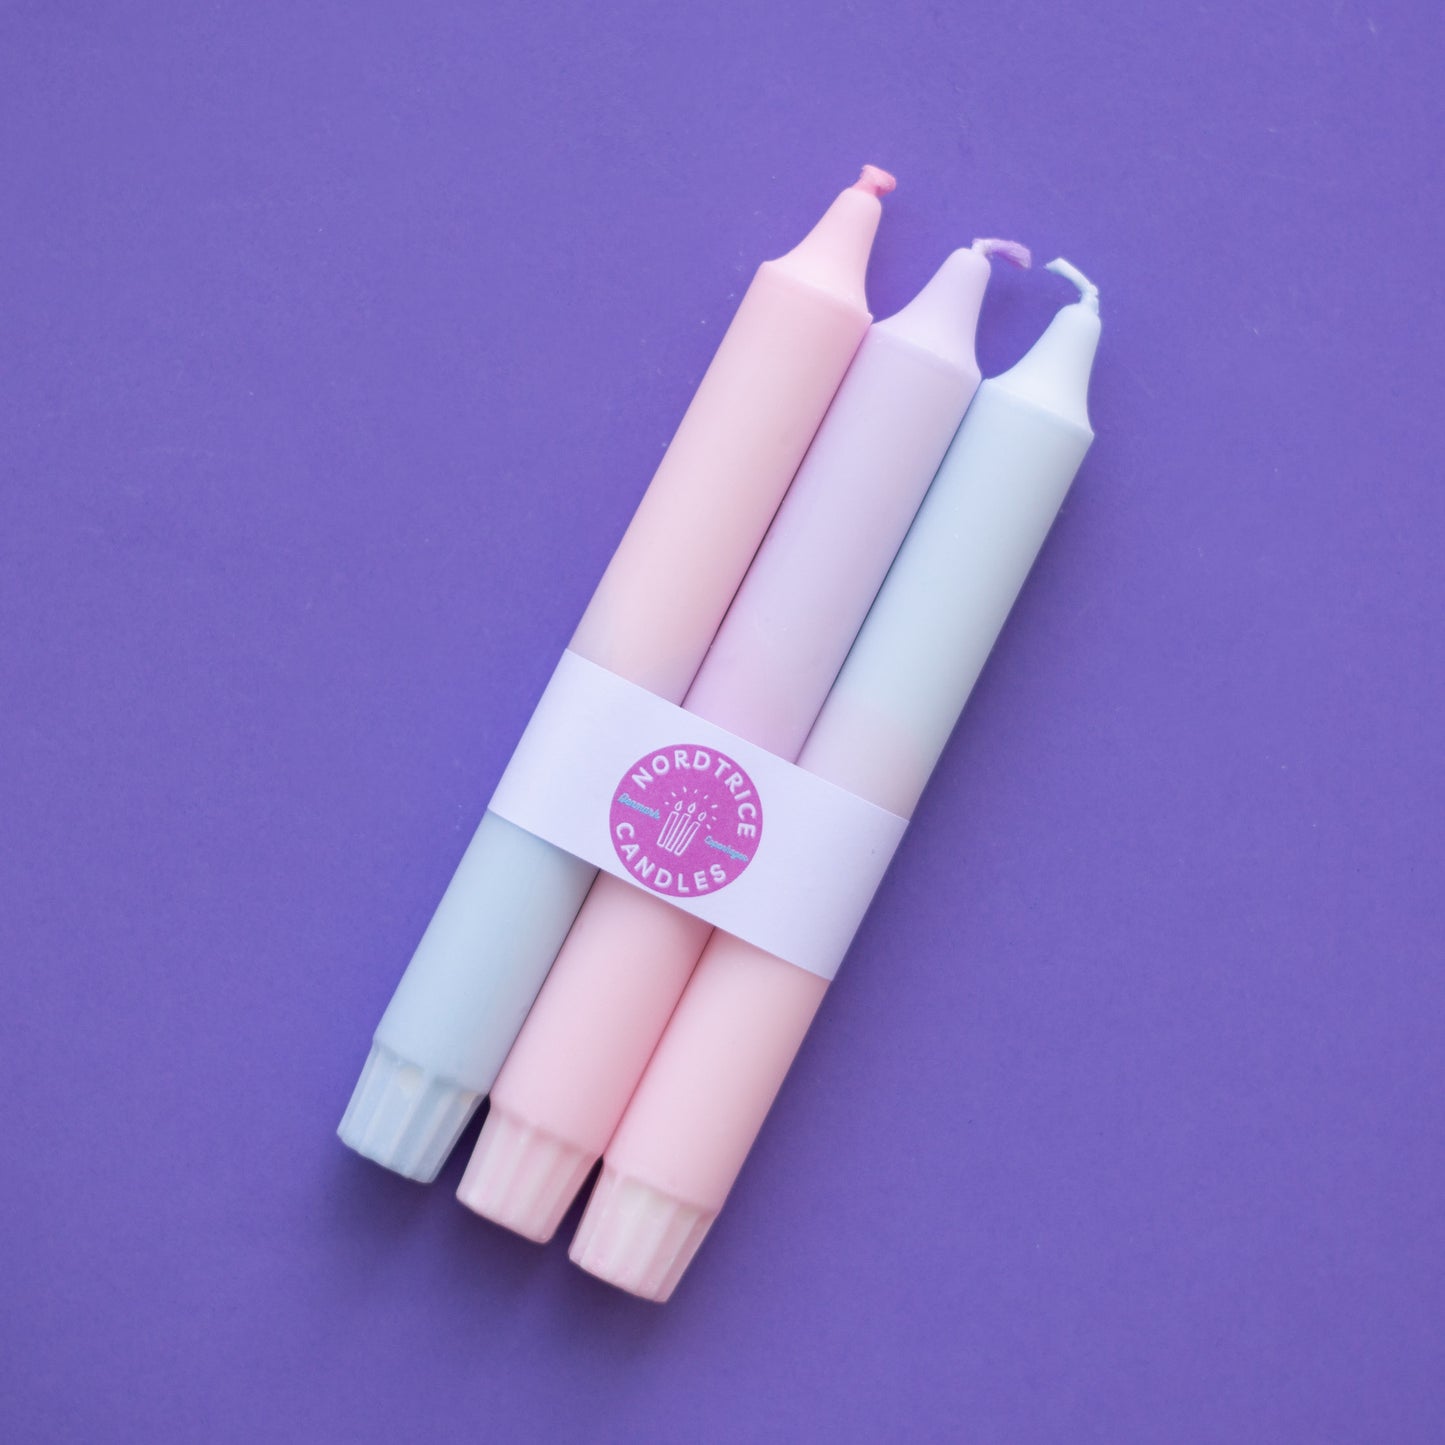 Party Candle Tapers - Pure Vegetable Wax, Hand-Dipped in Denmark